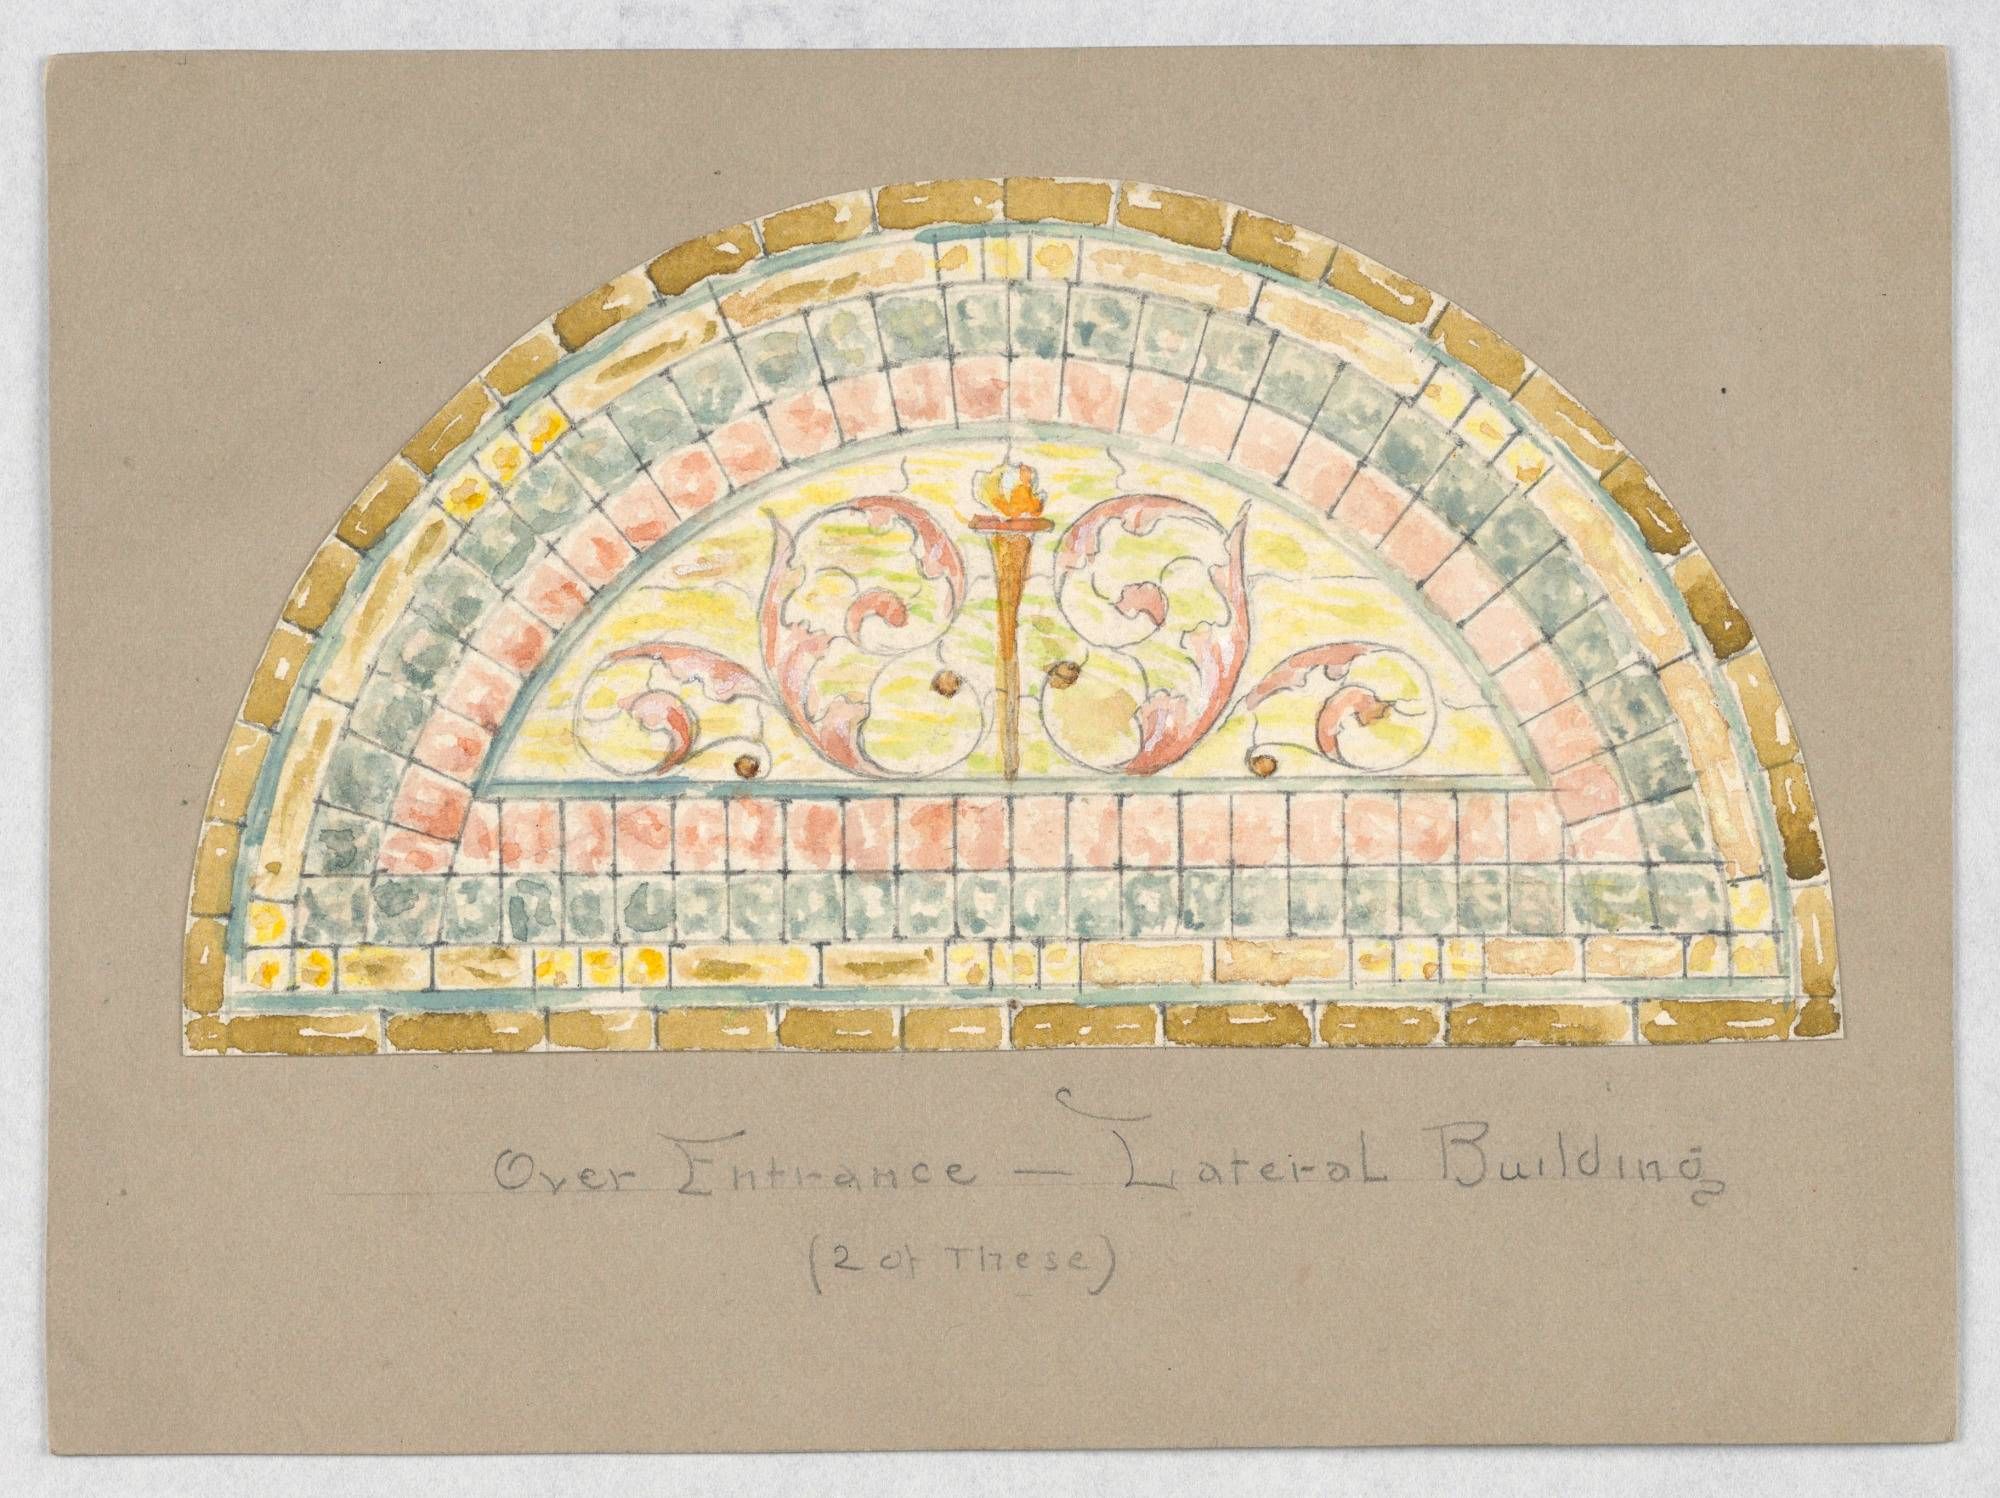 Design for Stained Glass Window: Over Main Entrance - Lateral Building, Carnegie Hall, New York, NY